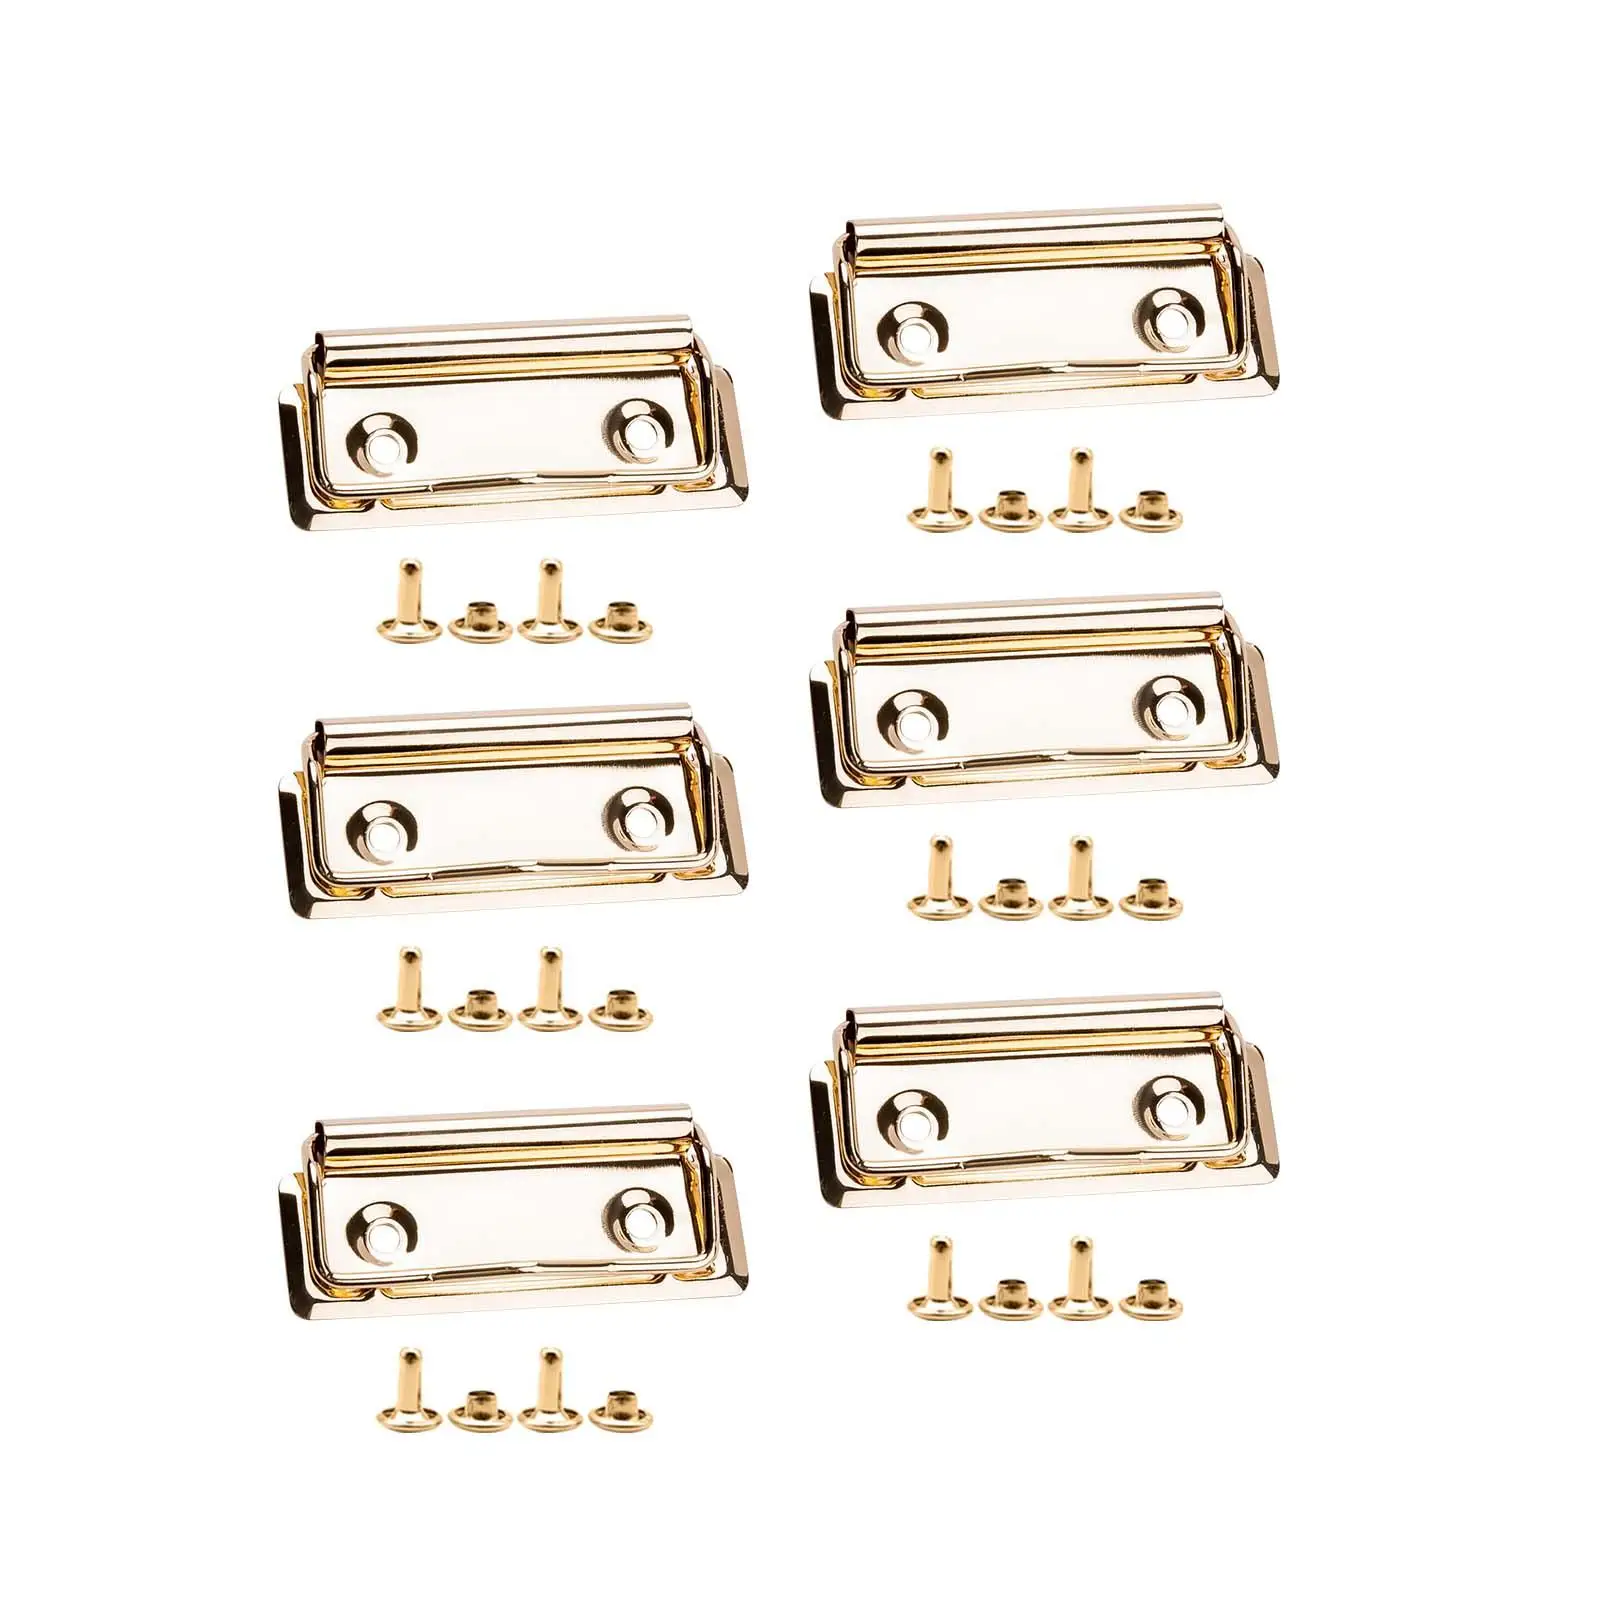 6x Clips for Clipboard Lightweight Heavy Duty Metal Stationery Plate Holder for Class School Stationery Supplies Business Office